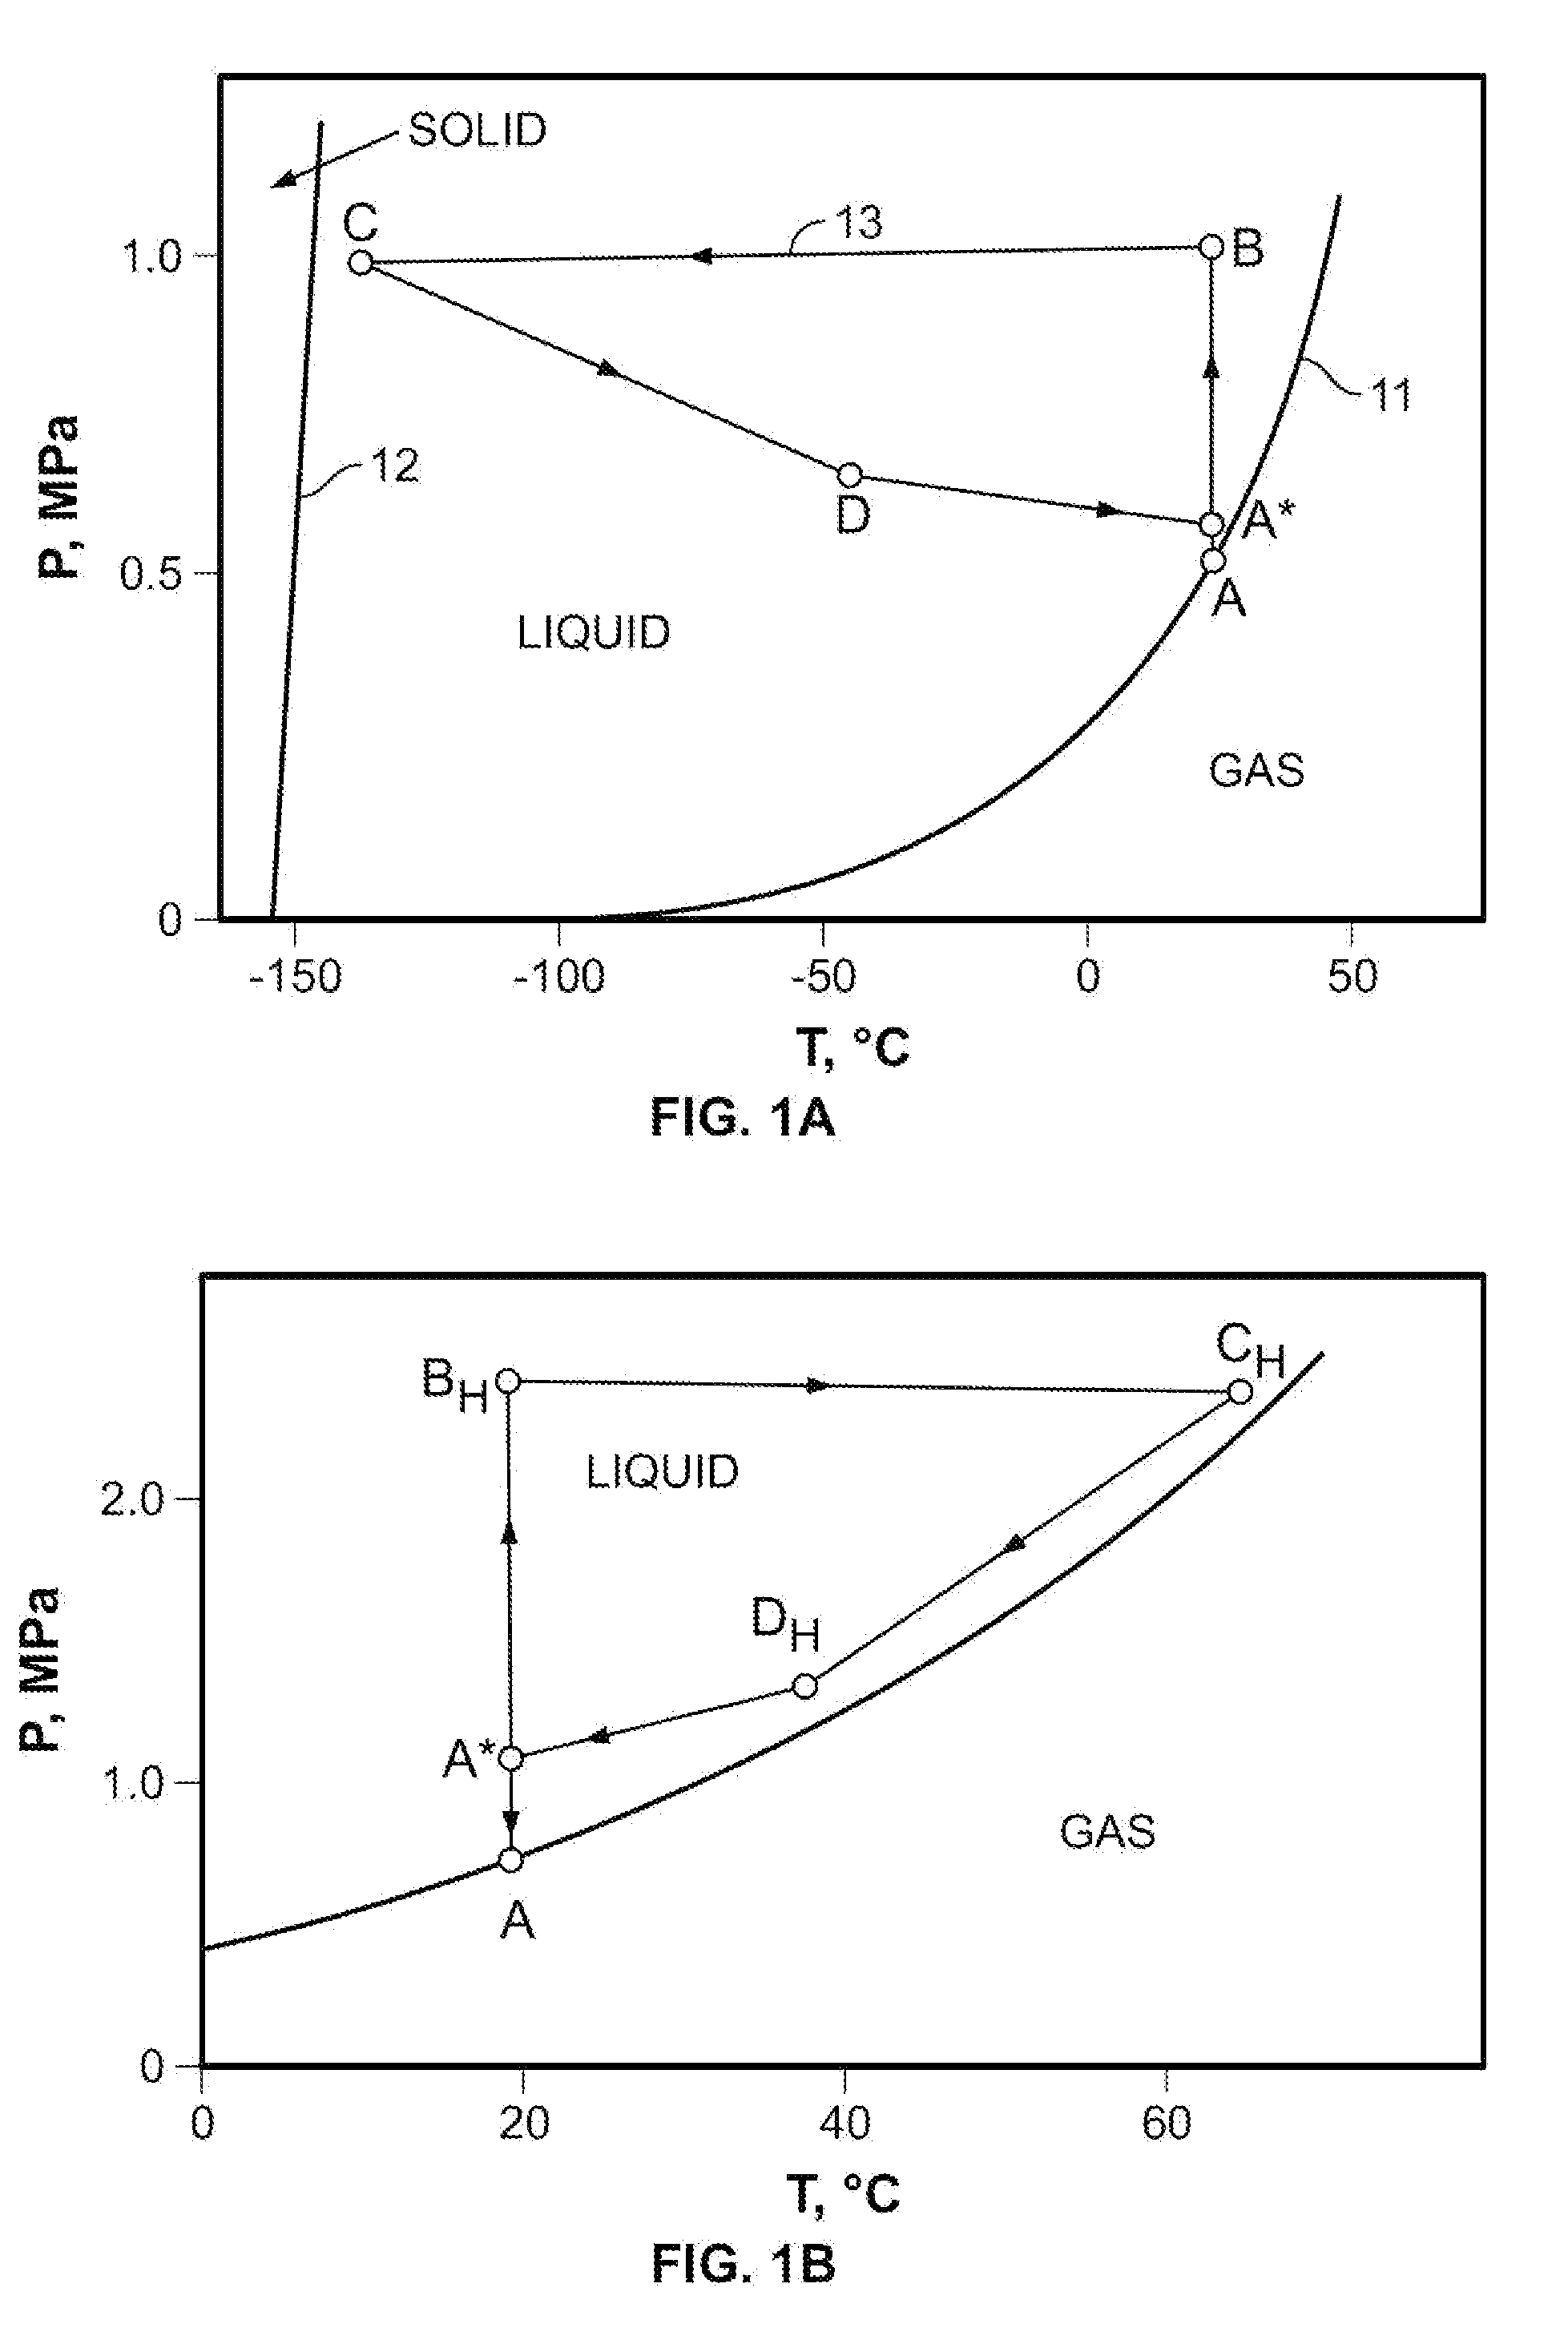 Single phase liquid refrigerant cryoablation system with multitubular distal section and related method